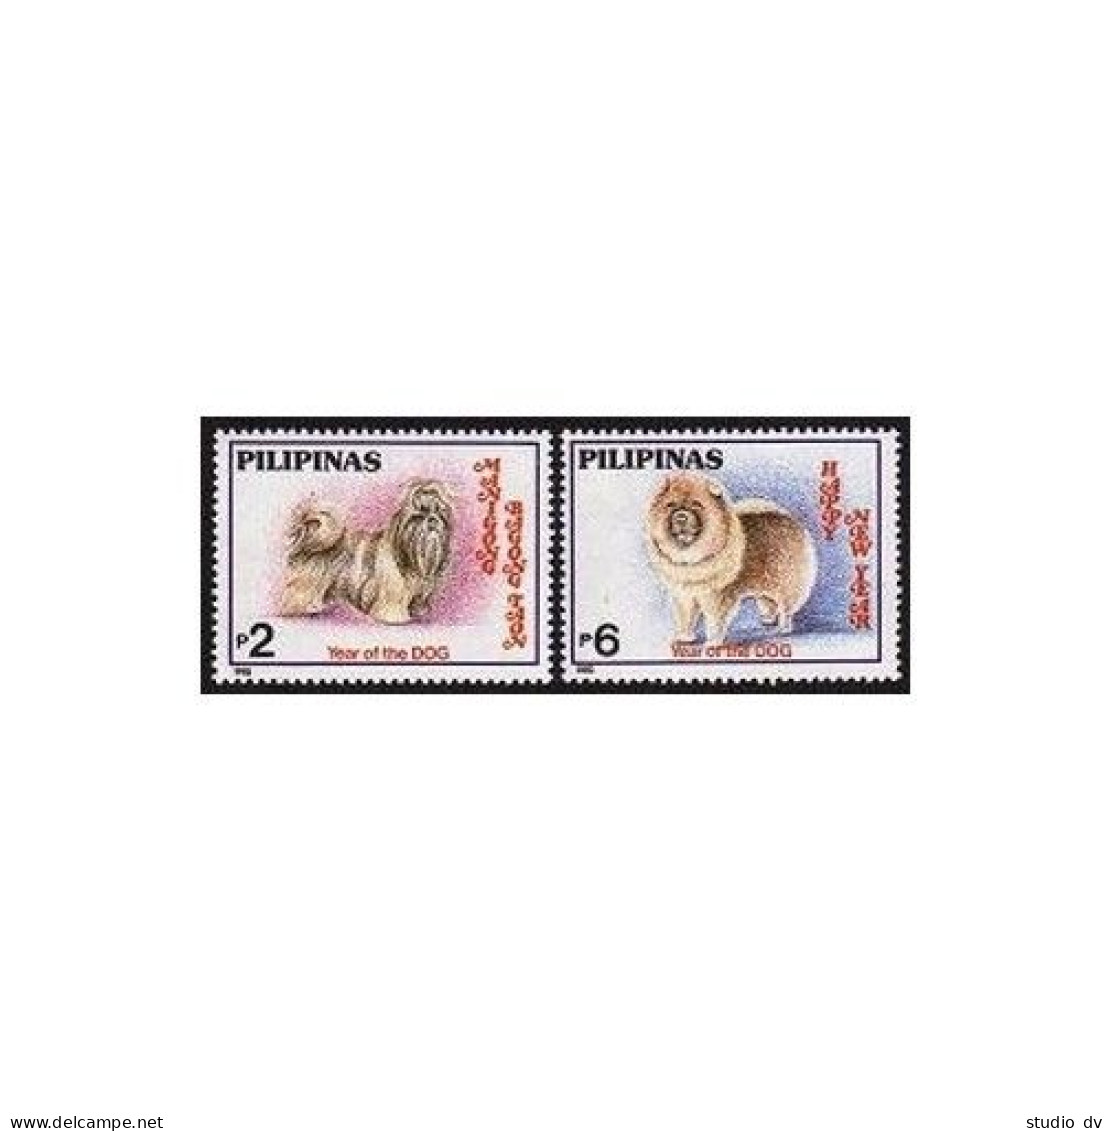 Philippines 2284-2285,2285a A,B,MNH. New Year 1994,Lunar Year Of The Dog. - Philippinen